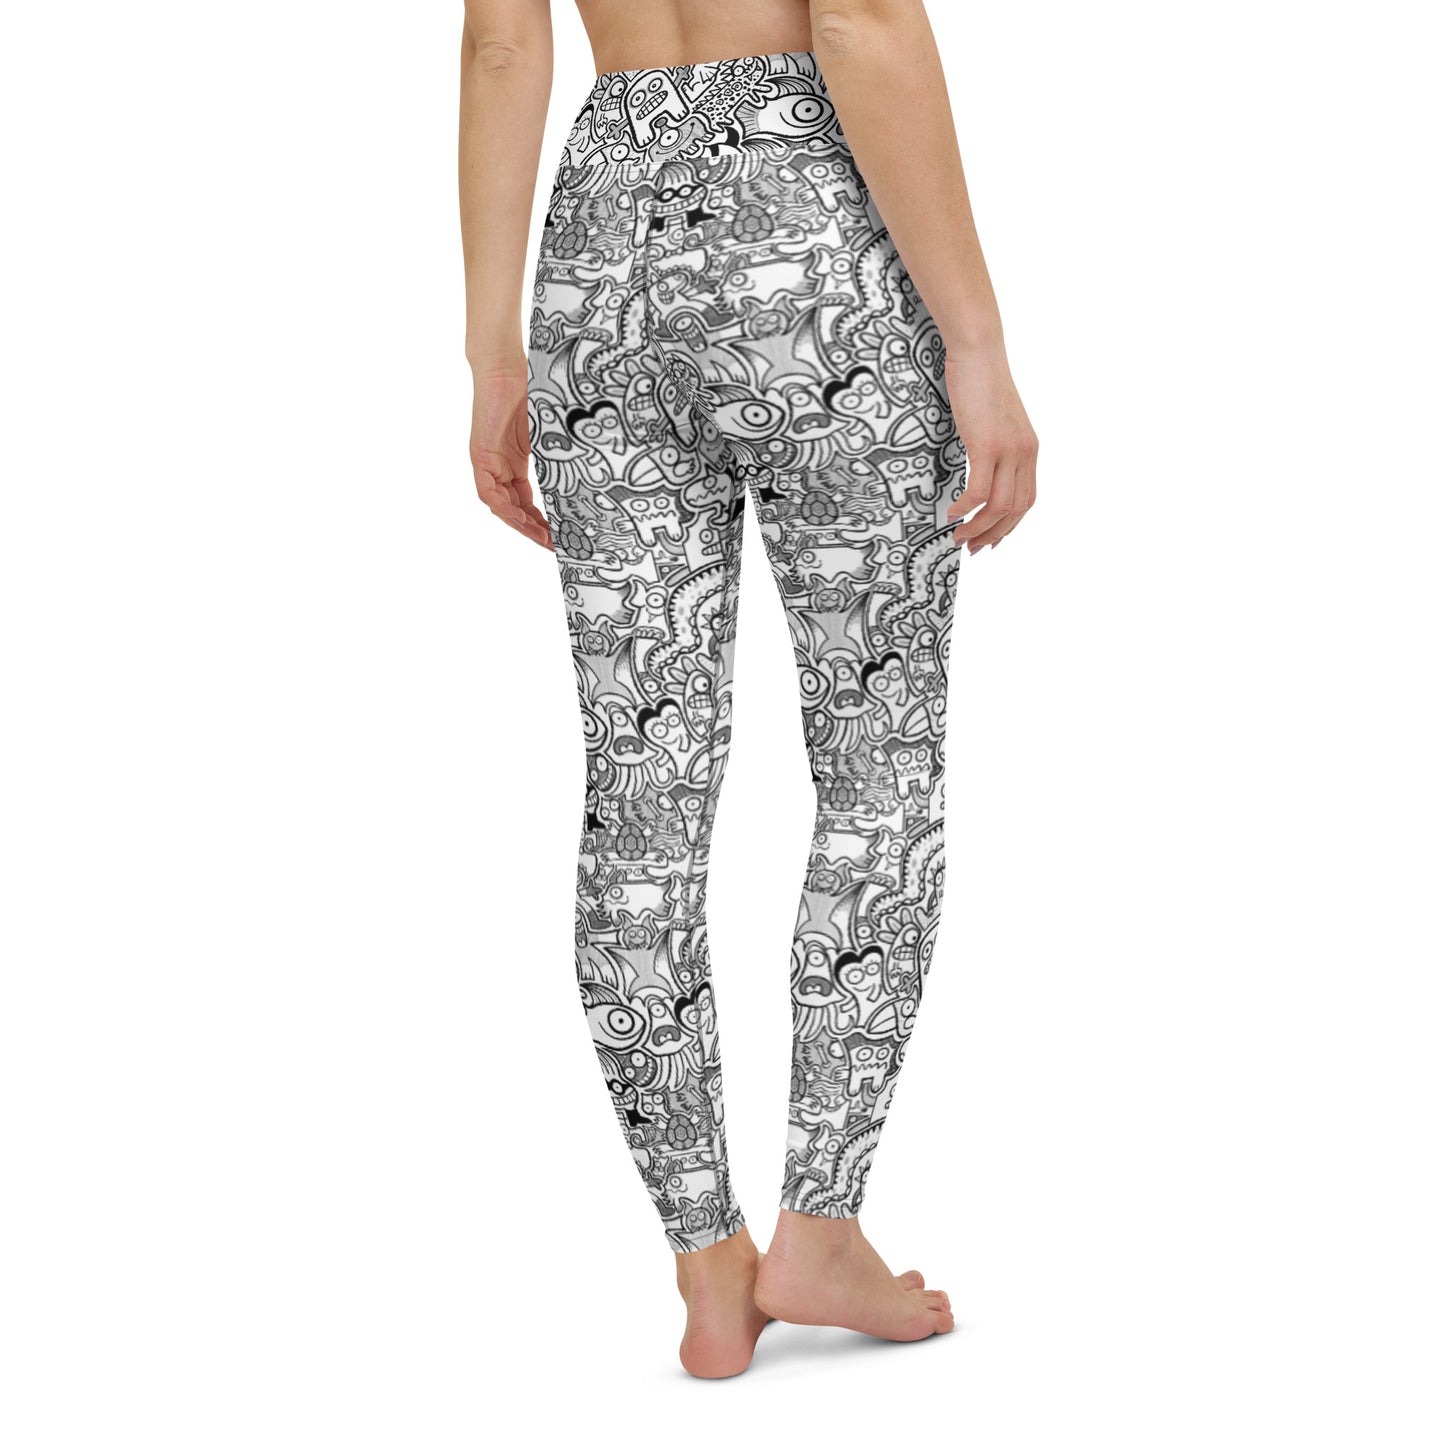 Fill your world with cool doodles Yoga Leggings. Back view